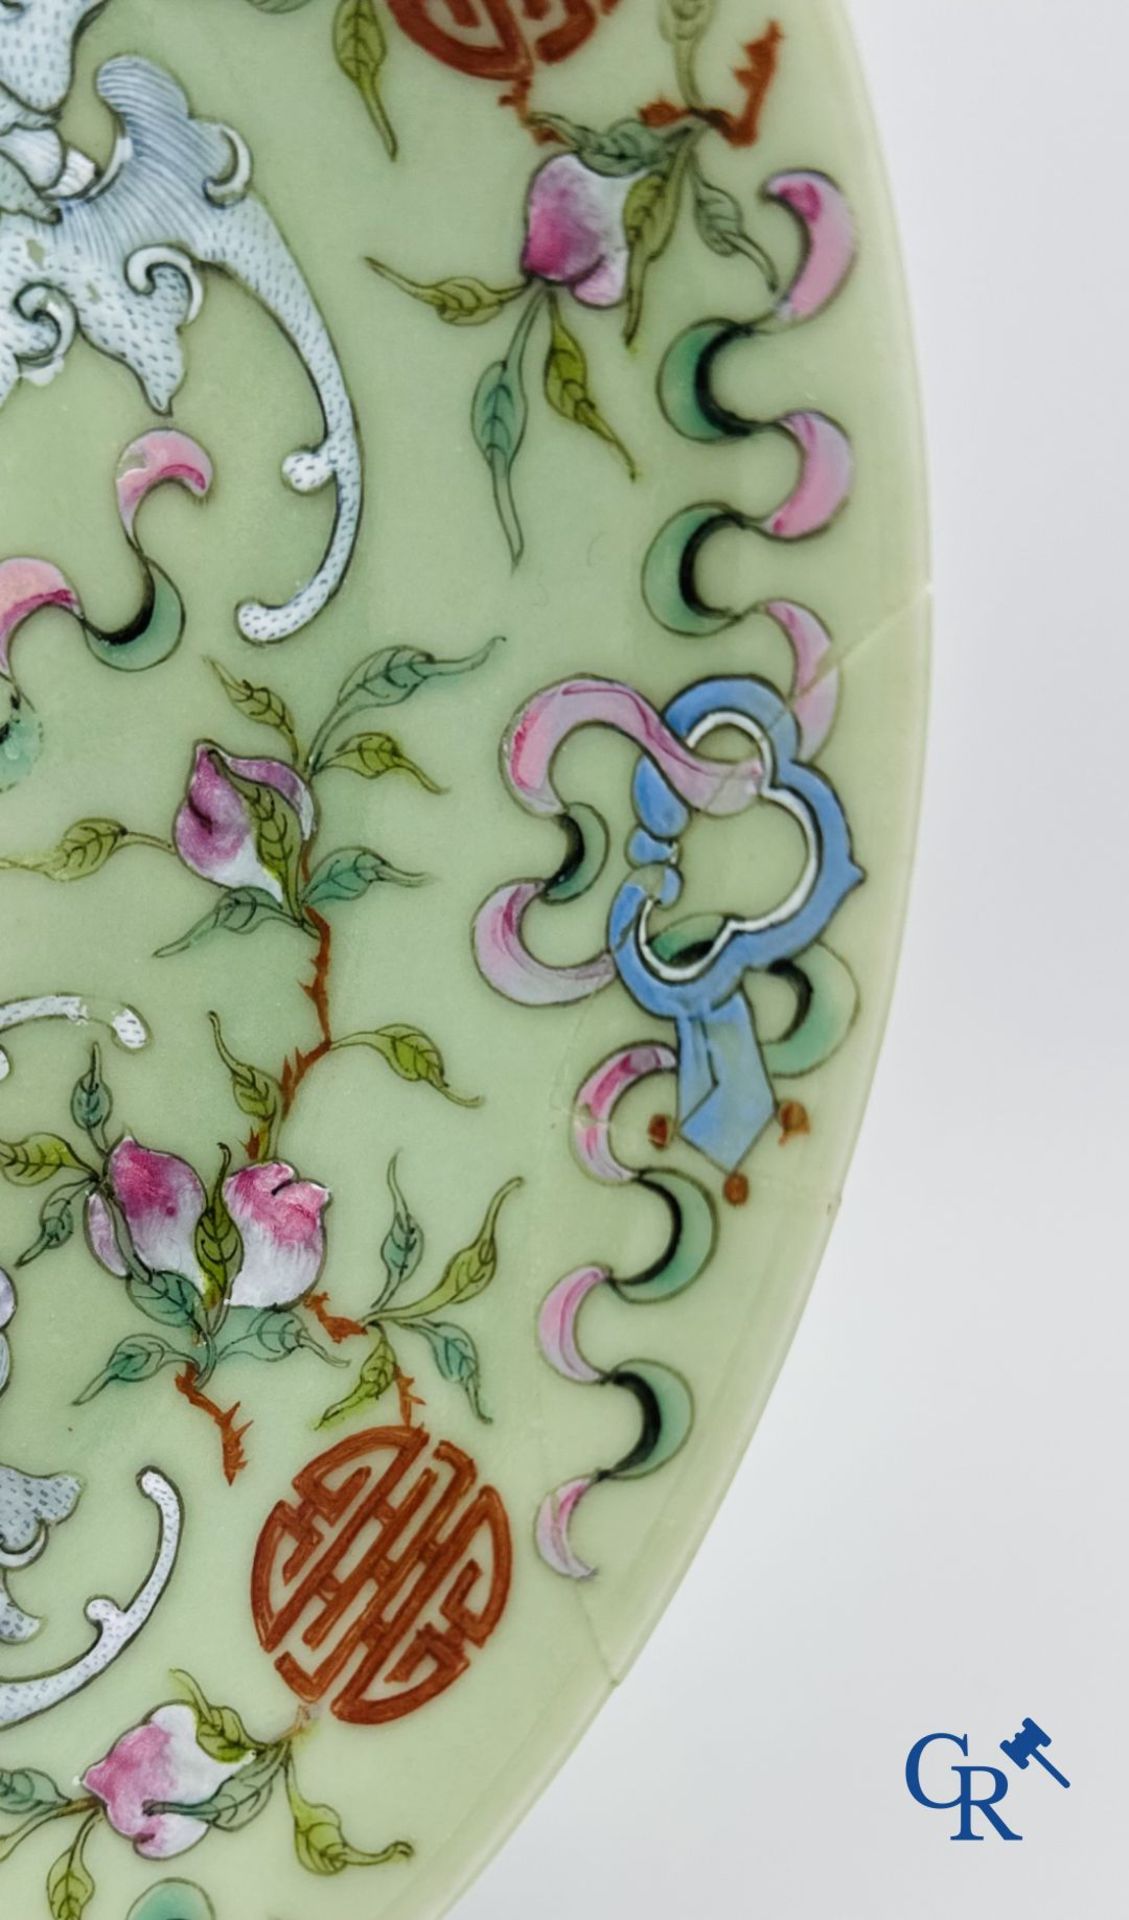 A fine Chinese porcelain celadon dish with a decor of "Shou." - Image 5 of 7